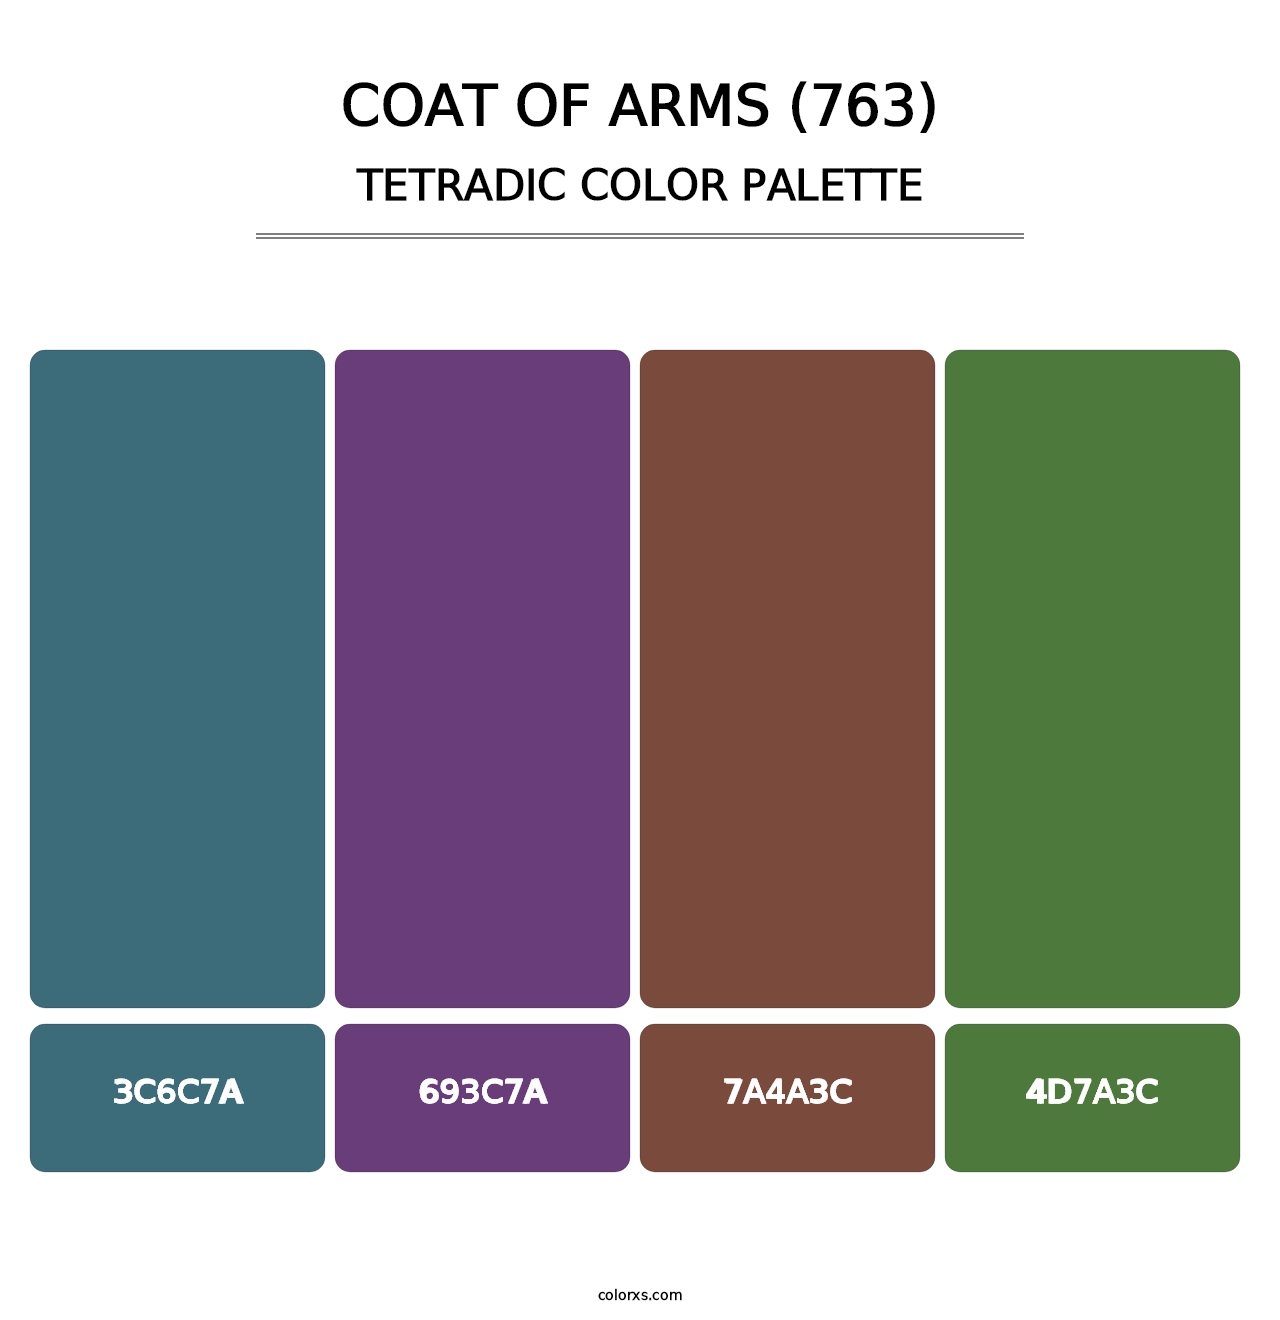 Coat of Arms (763) - Tetradic Color Palette